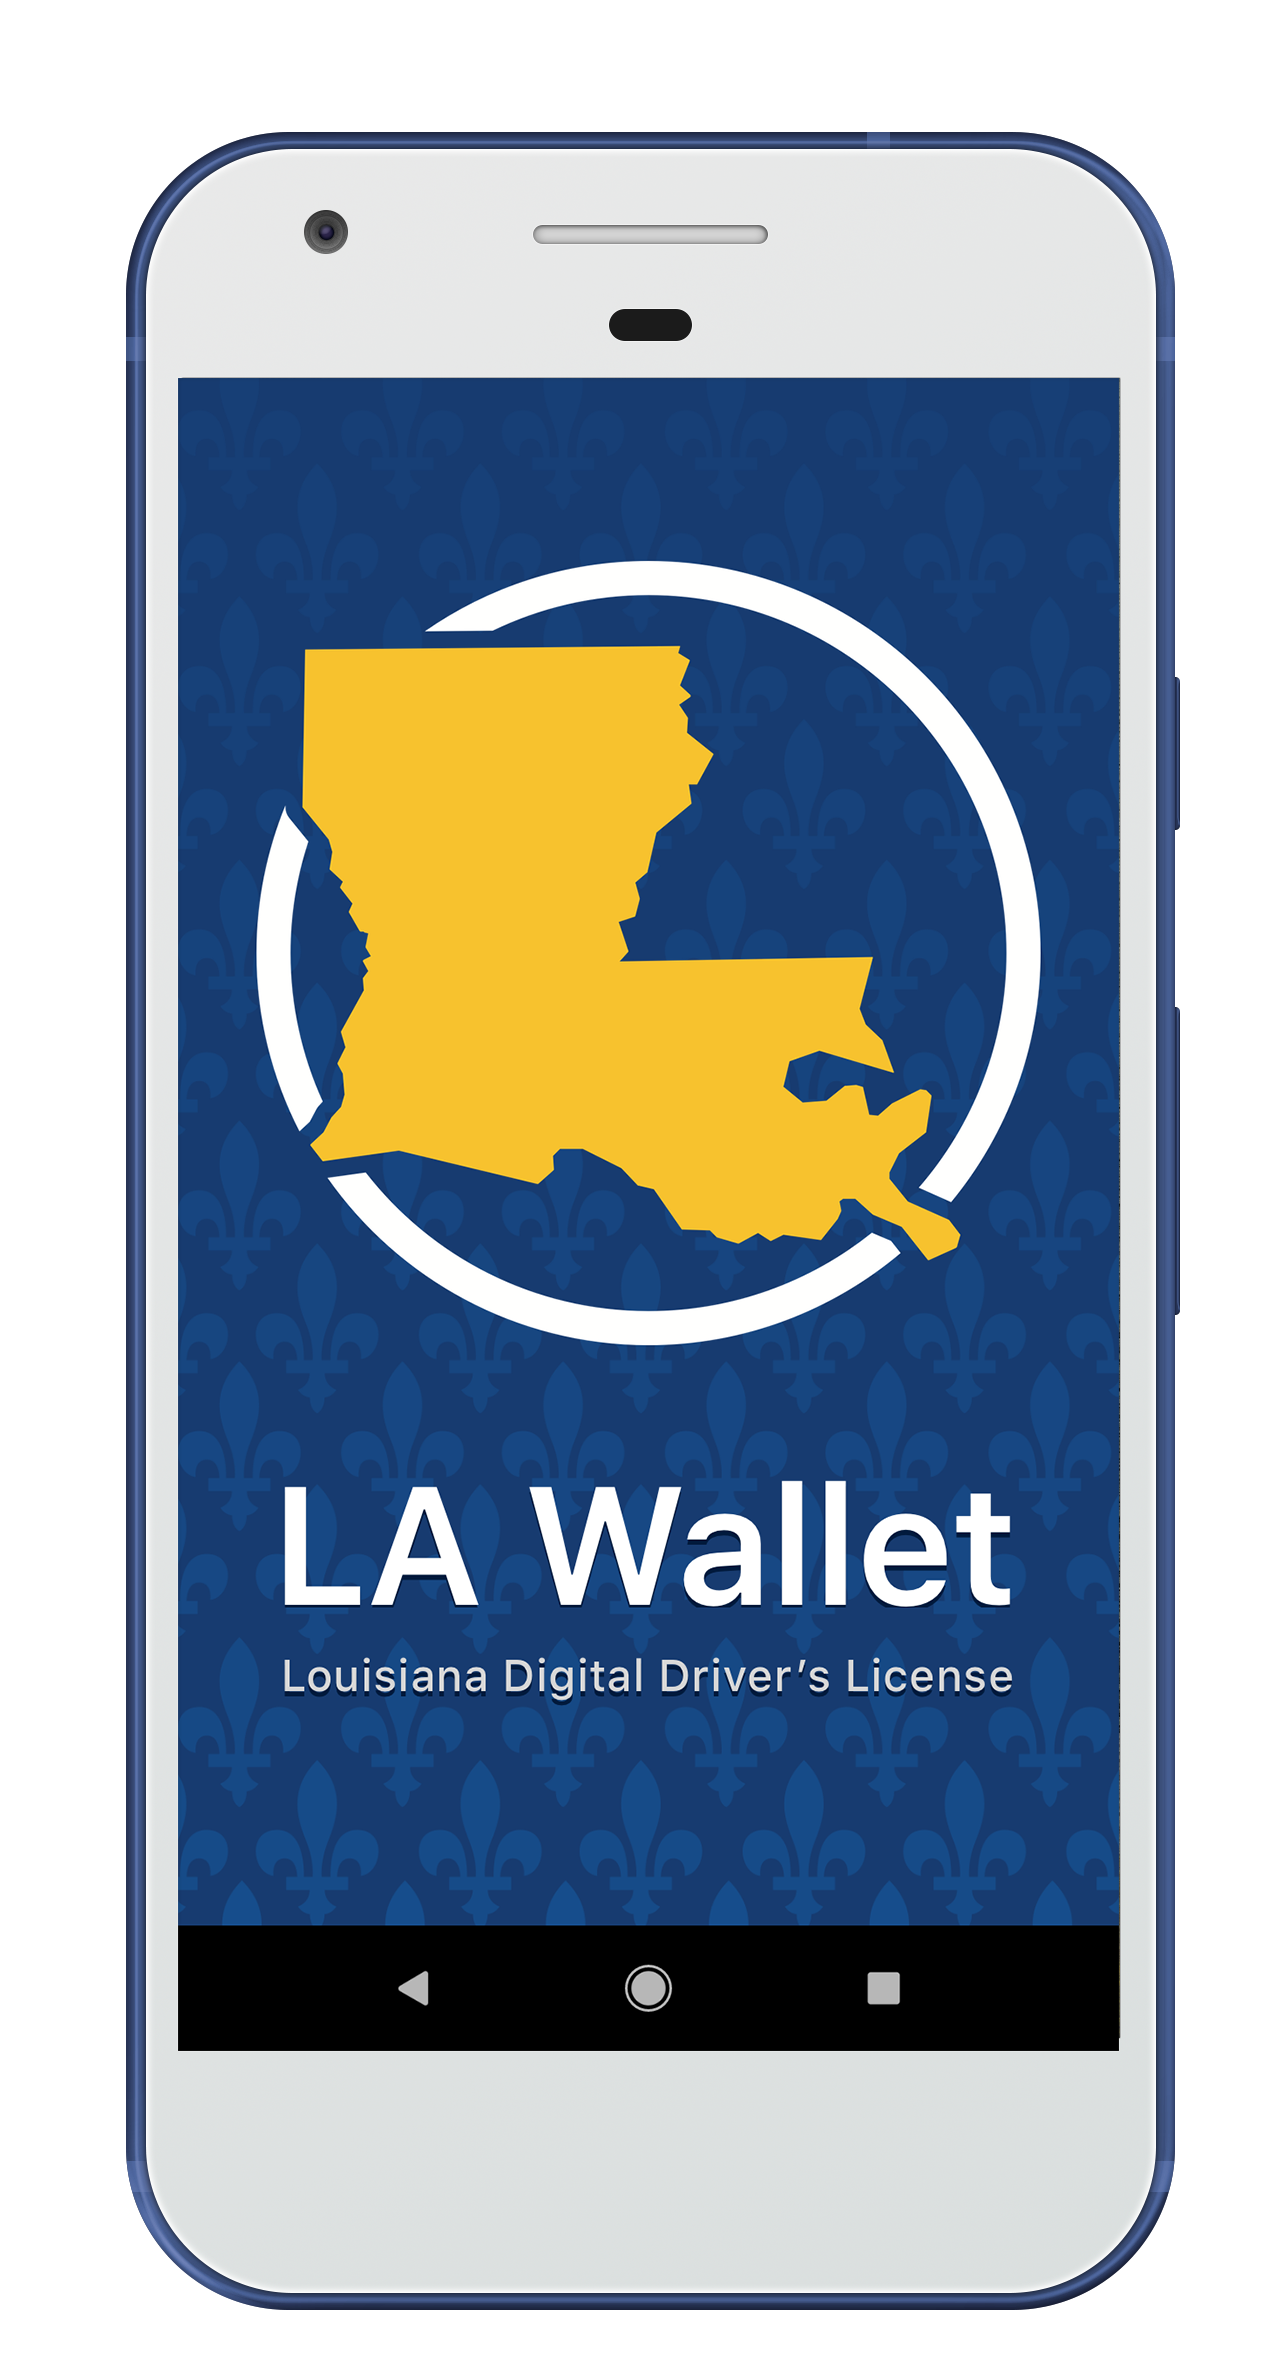 Verify Your Identity for DSNAP with the LA Wallet App Louisiana